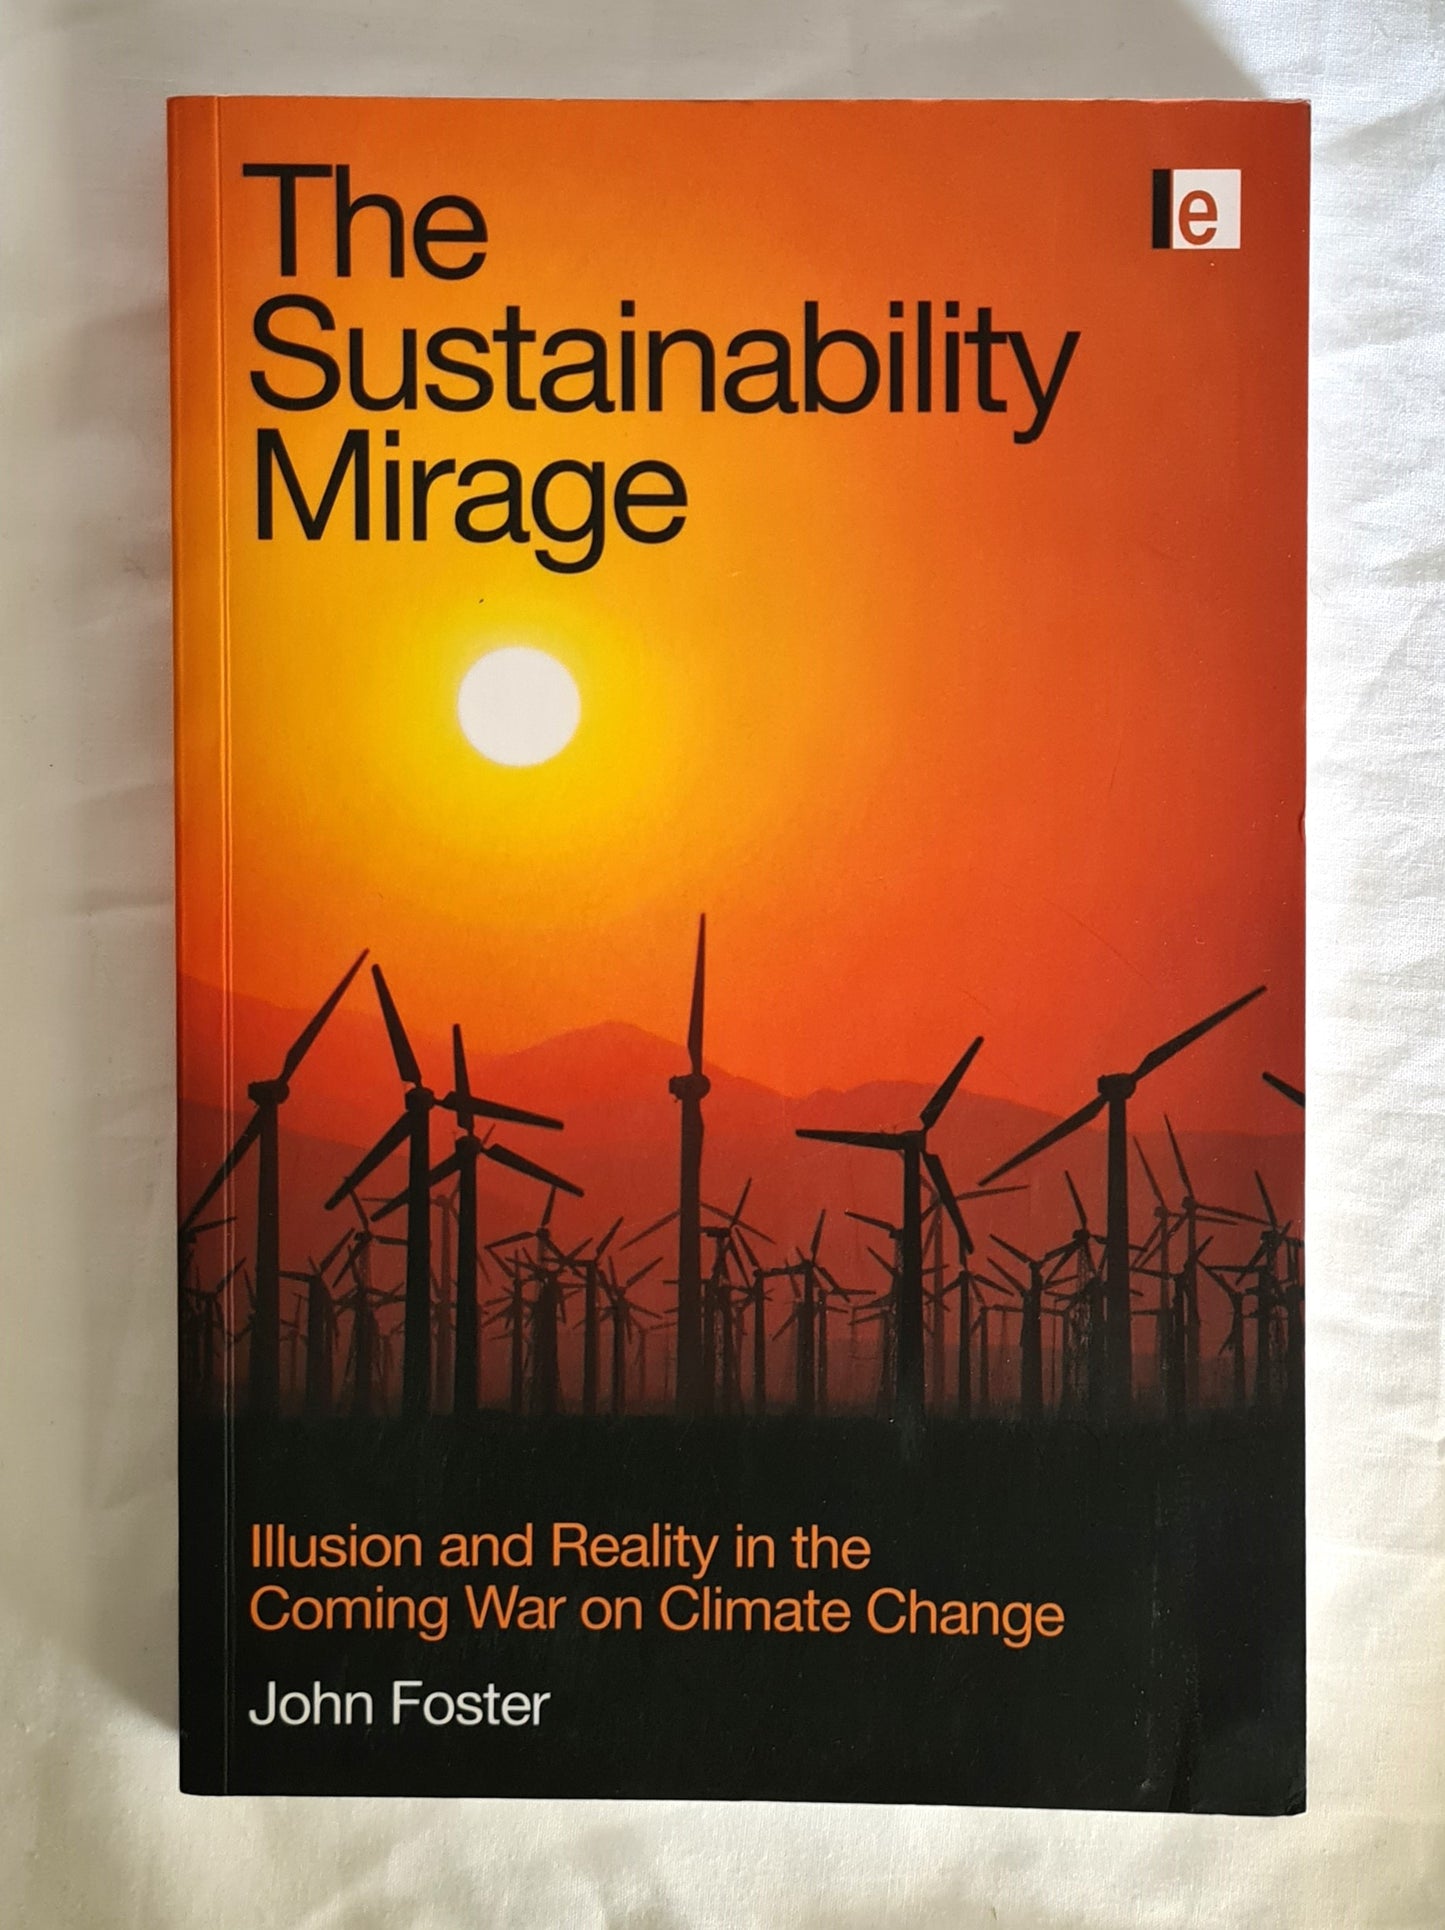 The Sustainability Mirage  Illusion and Reality in the Coming War on Climate Change  by John Foster